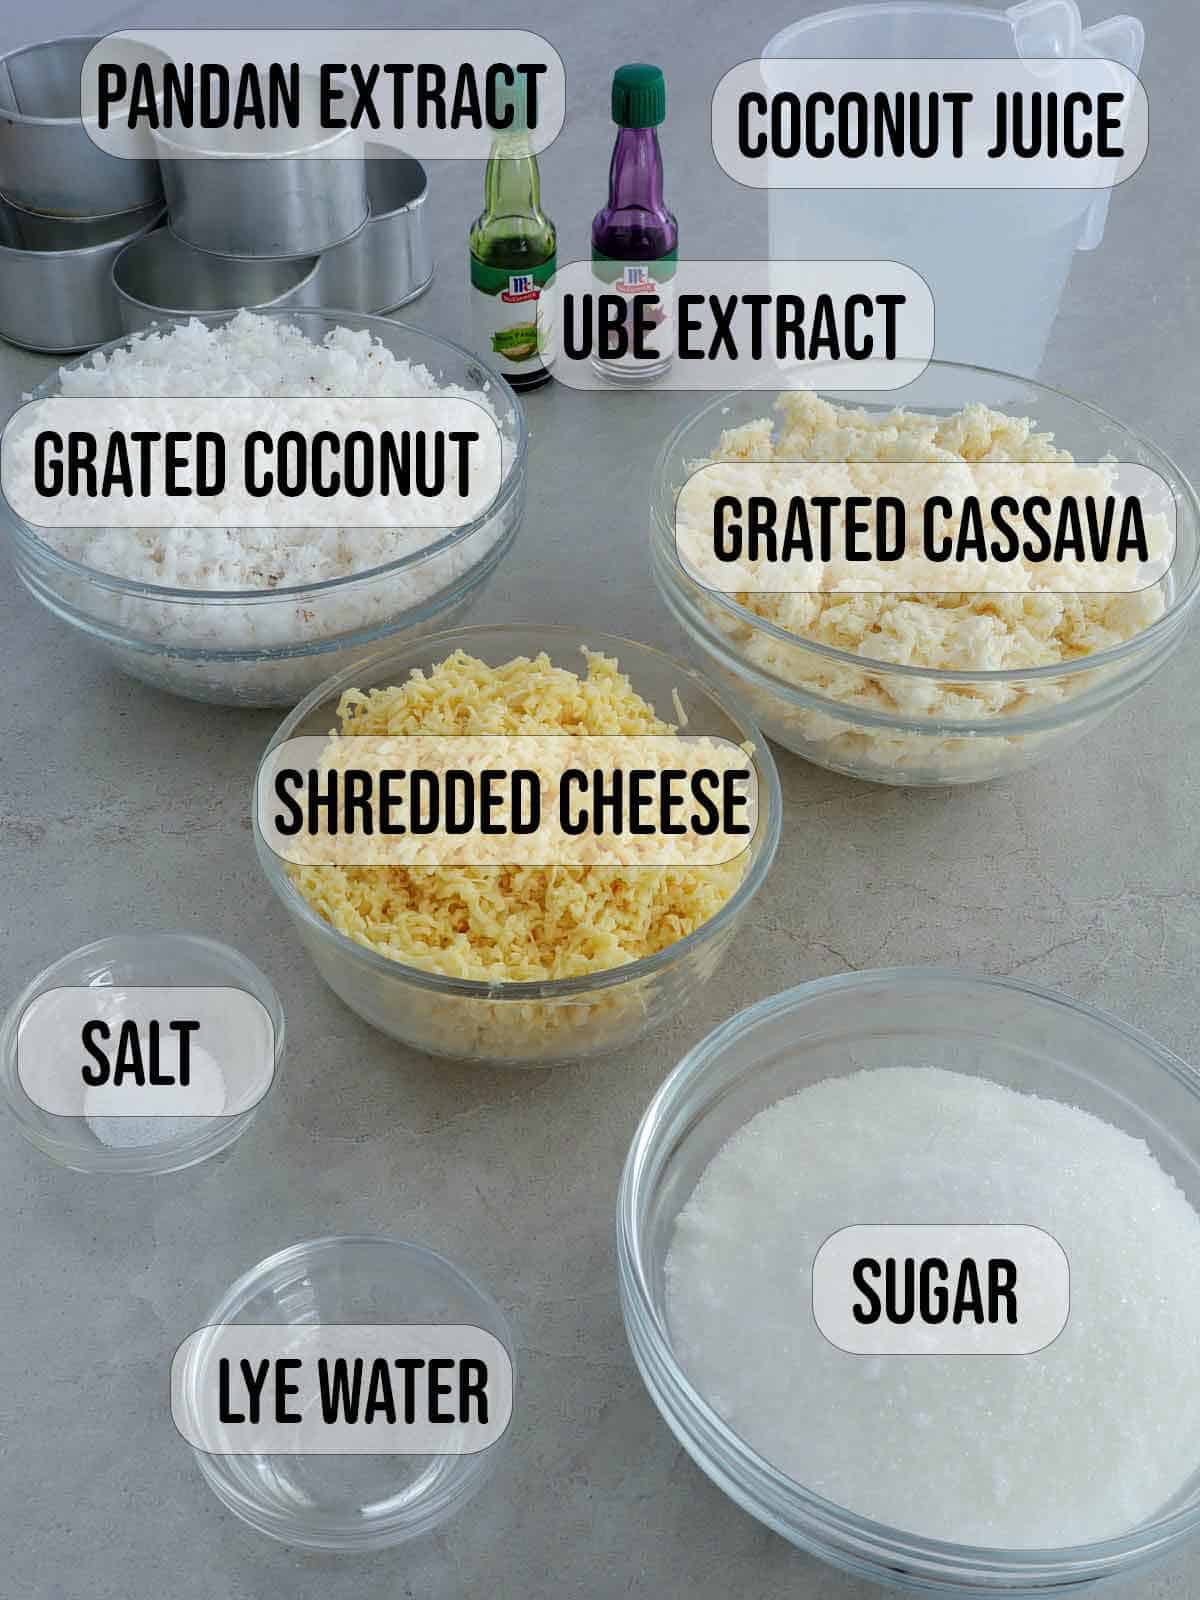 grated cassava, grated coconut, shredded cheese, salt, sugar, lye water, pandan and ube extracts, coconut juice in bowls.